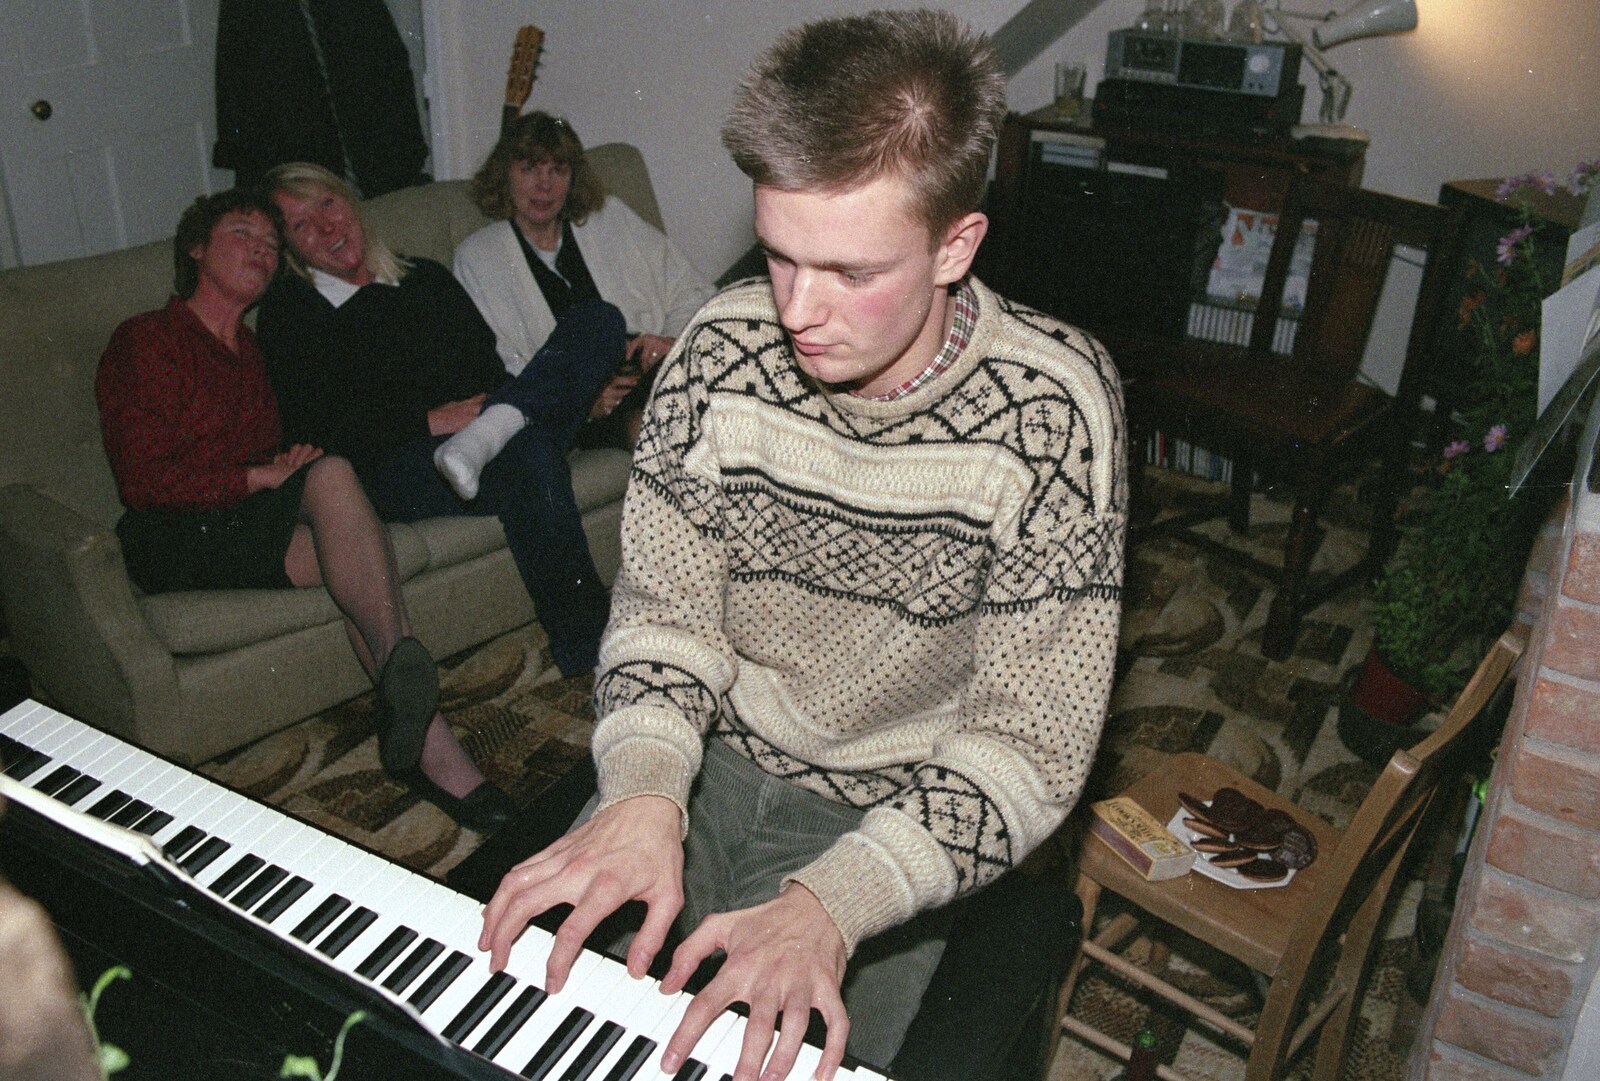 More piano action from Carol Singing and Late Night Shopping, Stuston, Diss and Harleston, Norfolk - 16th December 1990